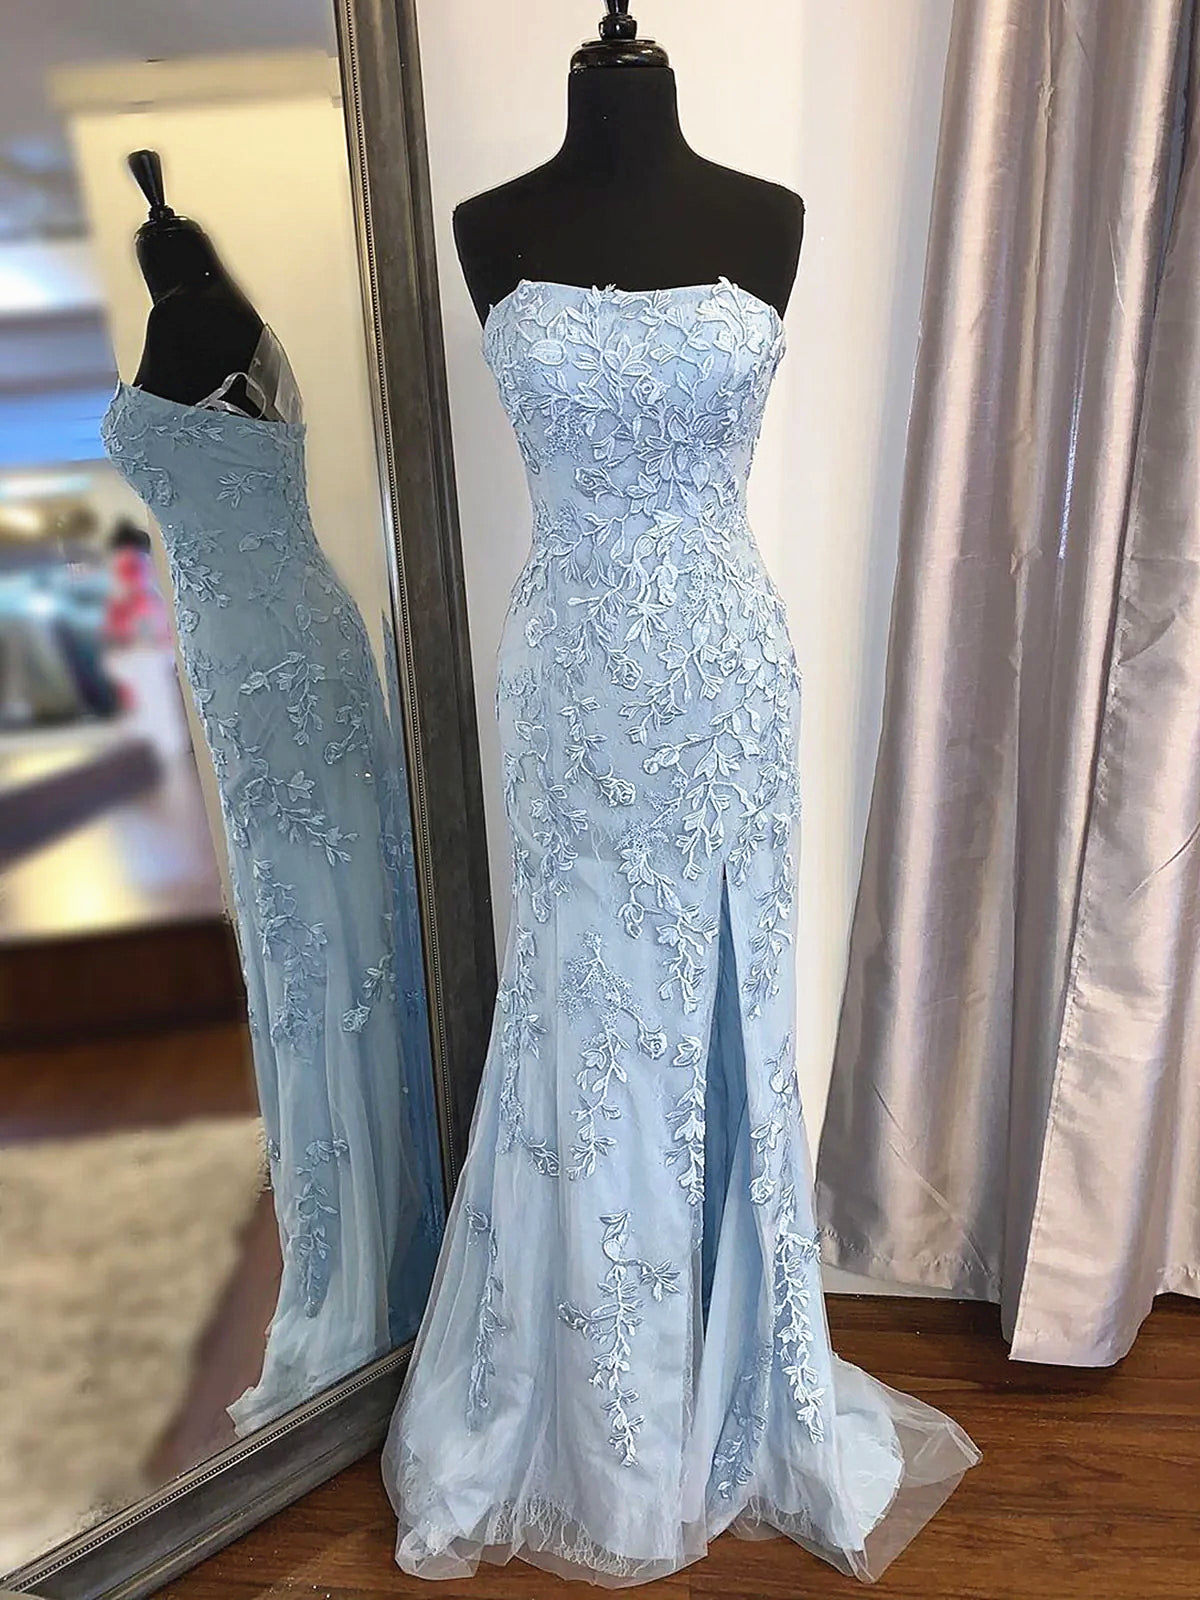 Strapless Sky Blue Lace Mermaid Long Prom Dresses, Blue Lace Mermaid Formal Graduation Dresses